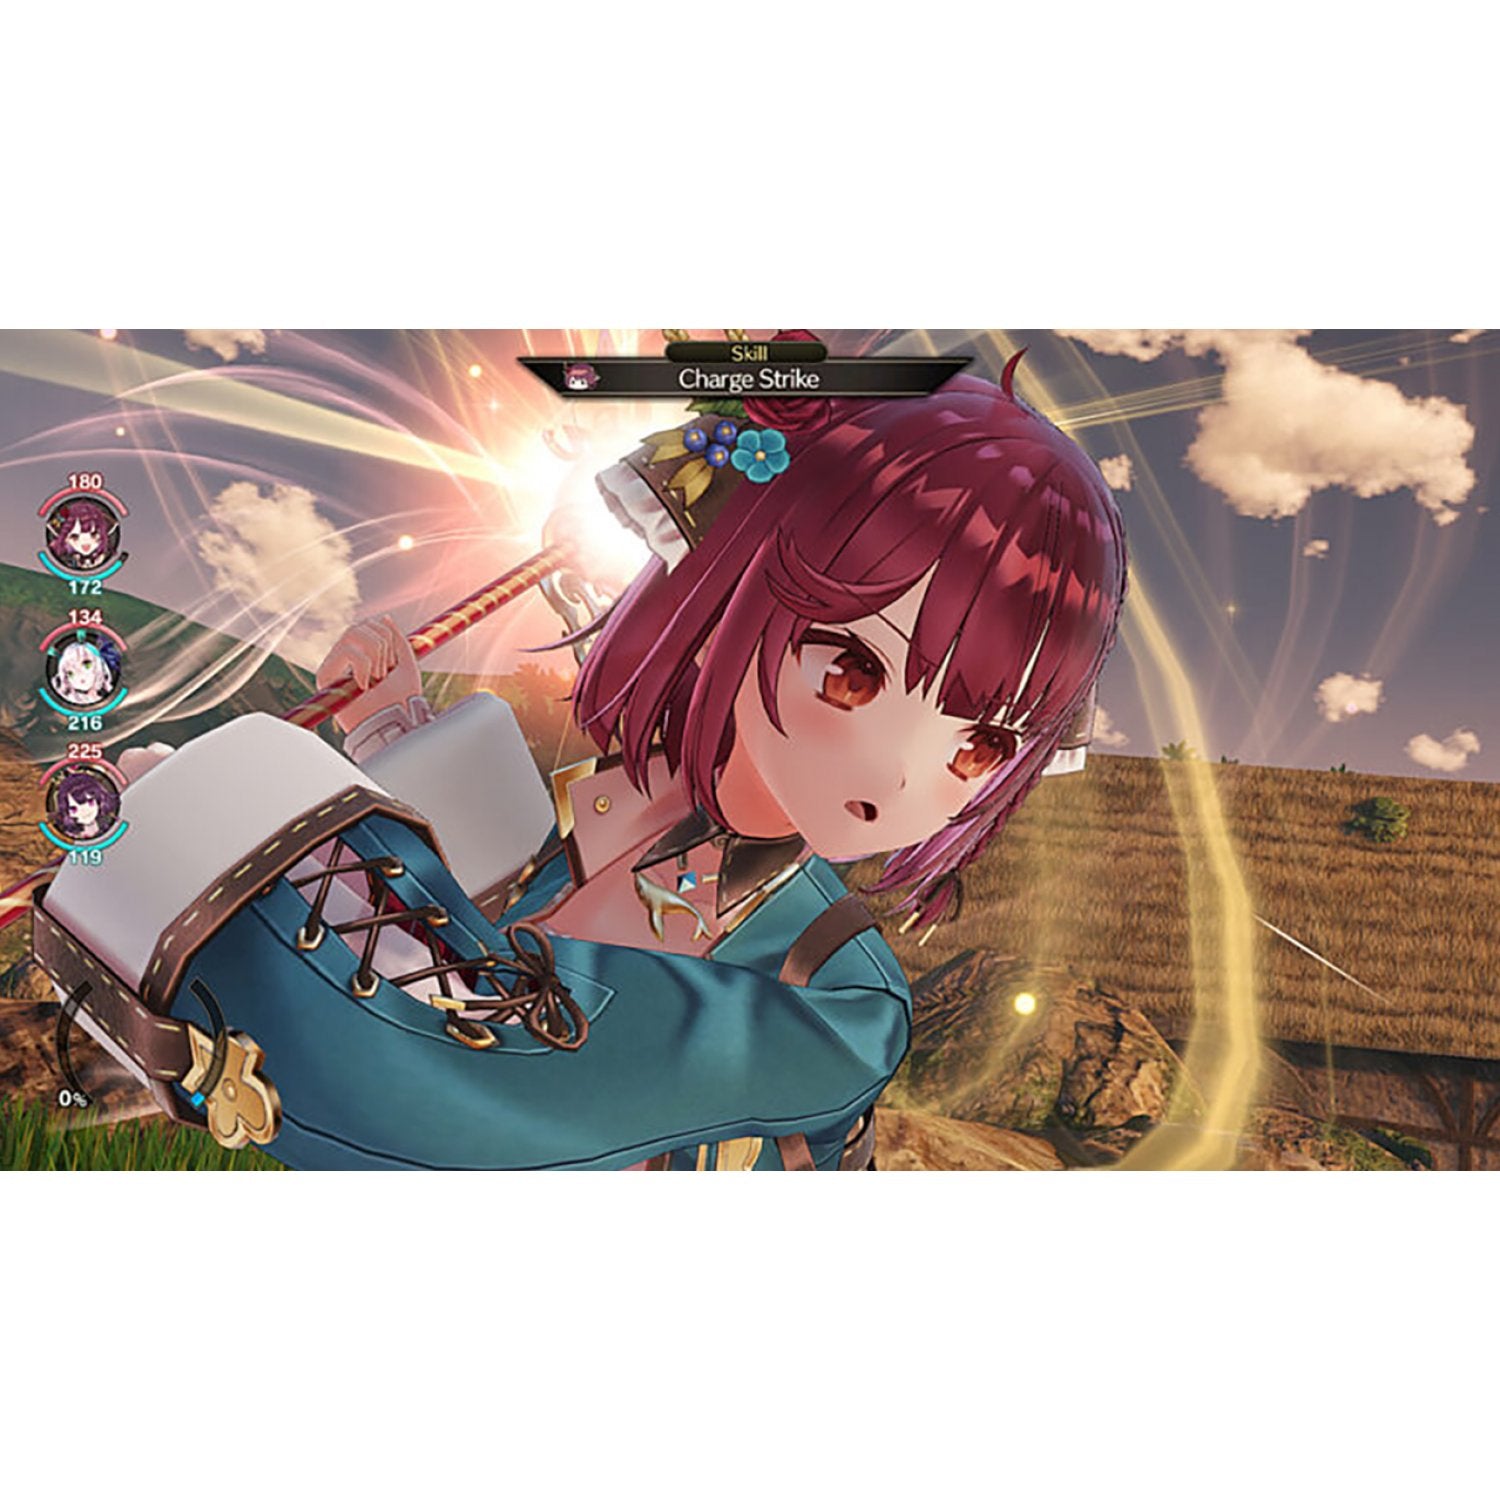 PS4 Atelier Sophie 2: The Alchemist of the Mysterious Dream